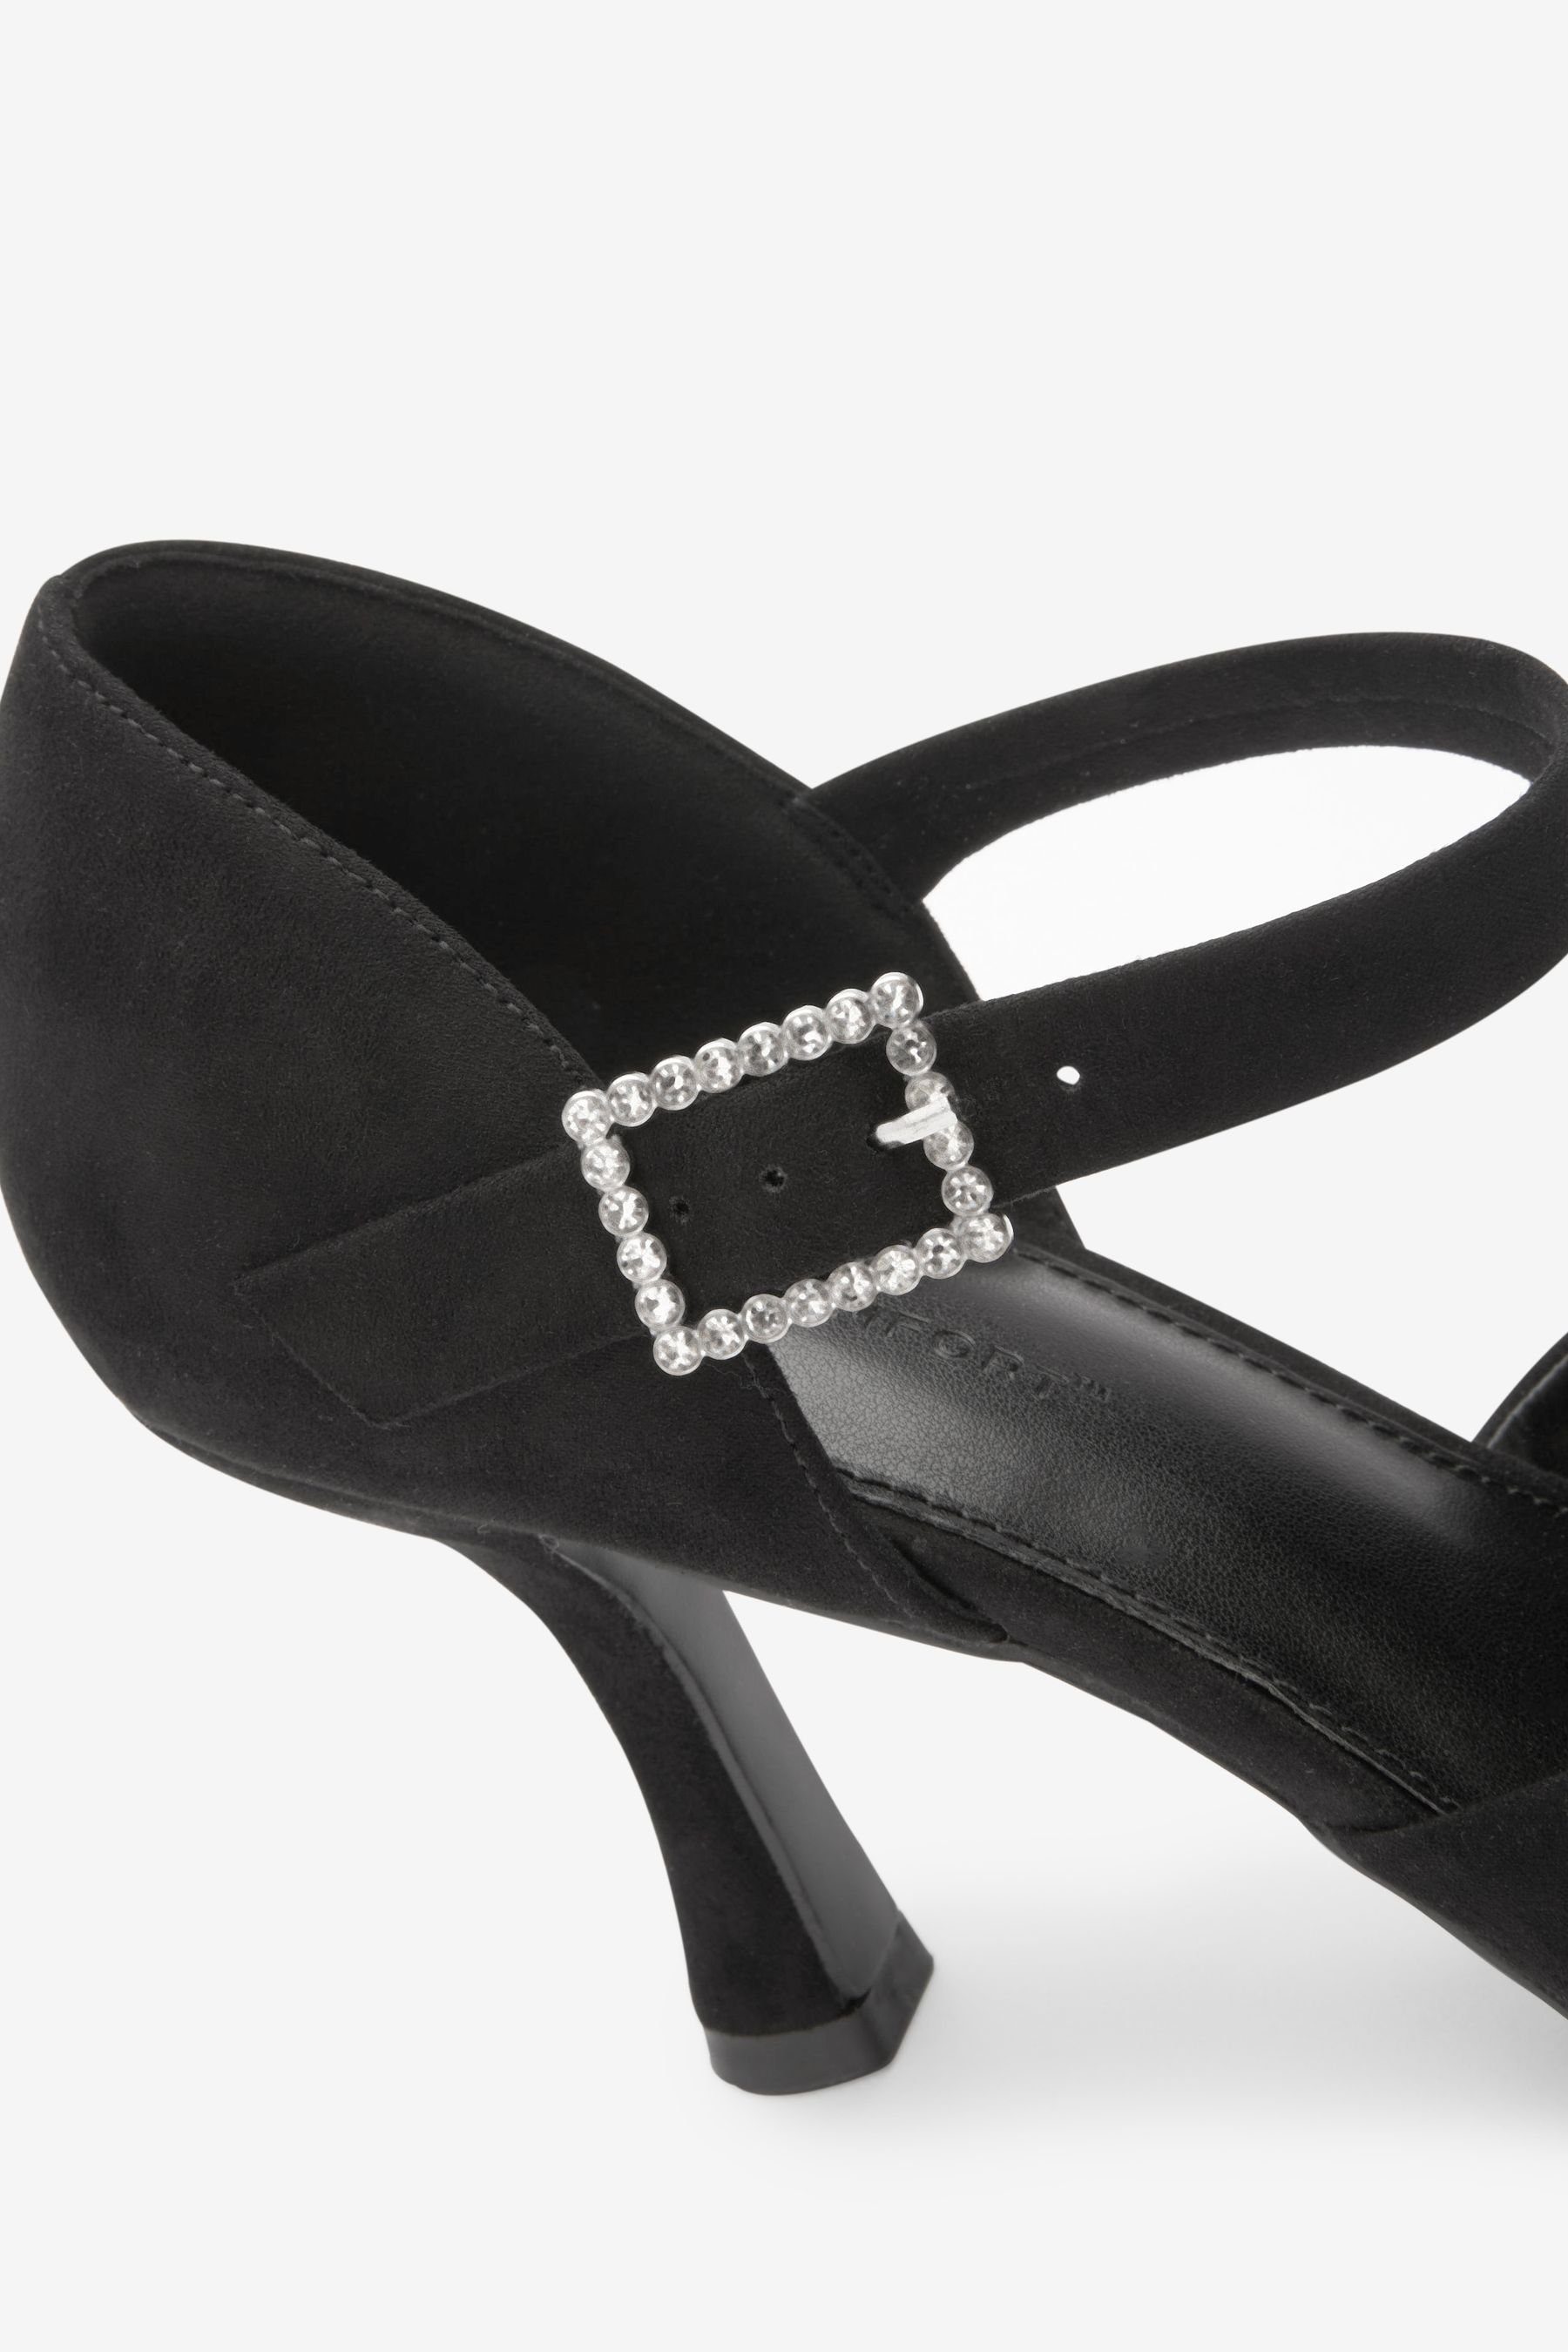 Mary-Jane-Pumps with (1-tlg) Spitze Jewel Black Mary-Jane-Schuhe Comfort Forever Buckle Next